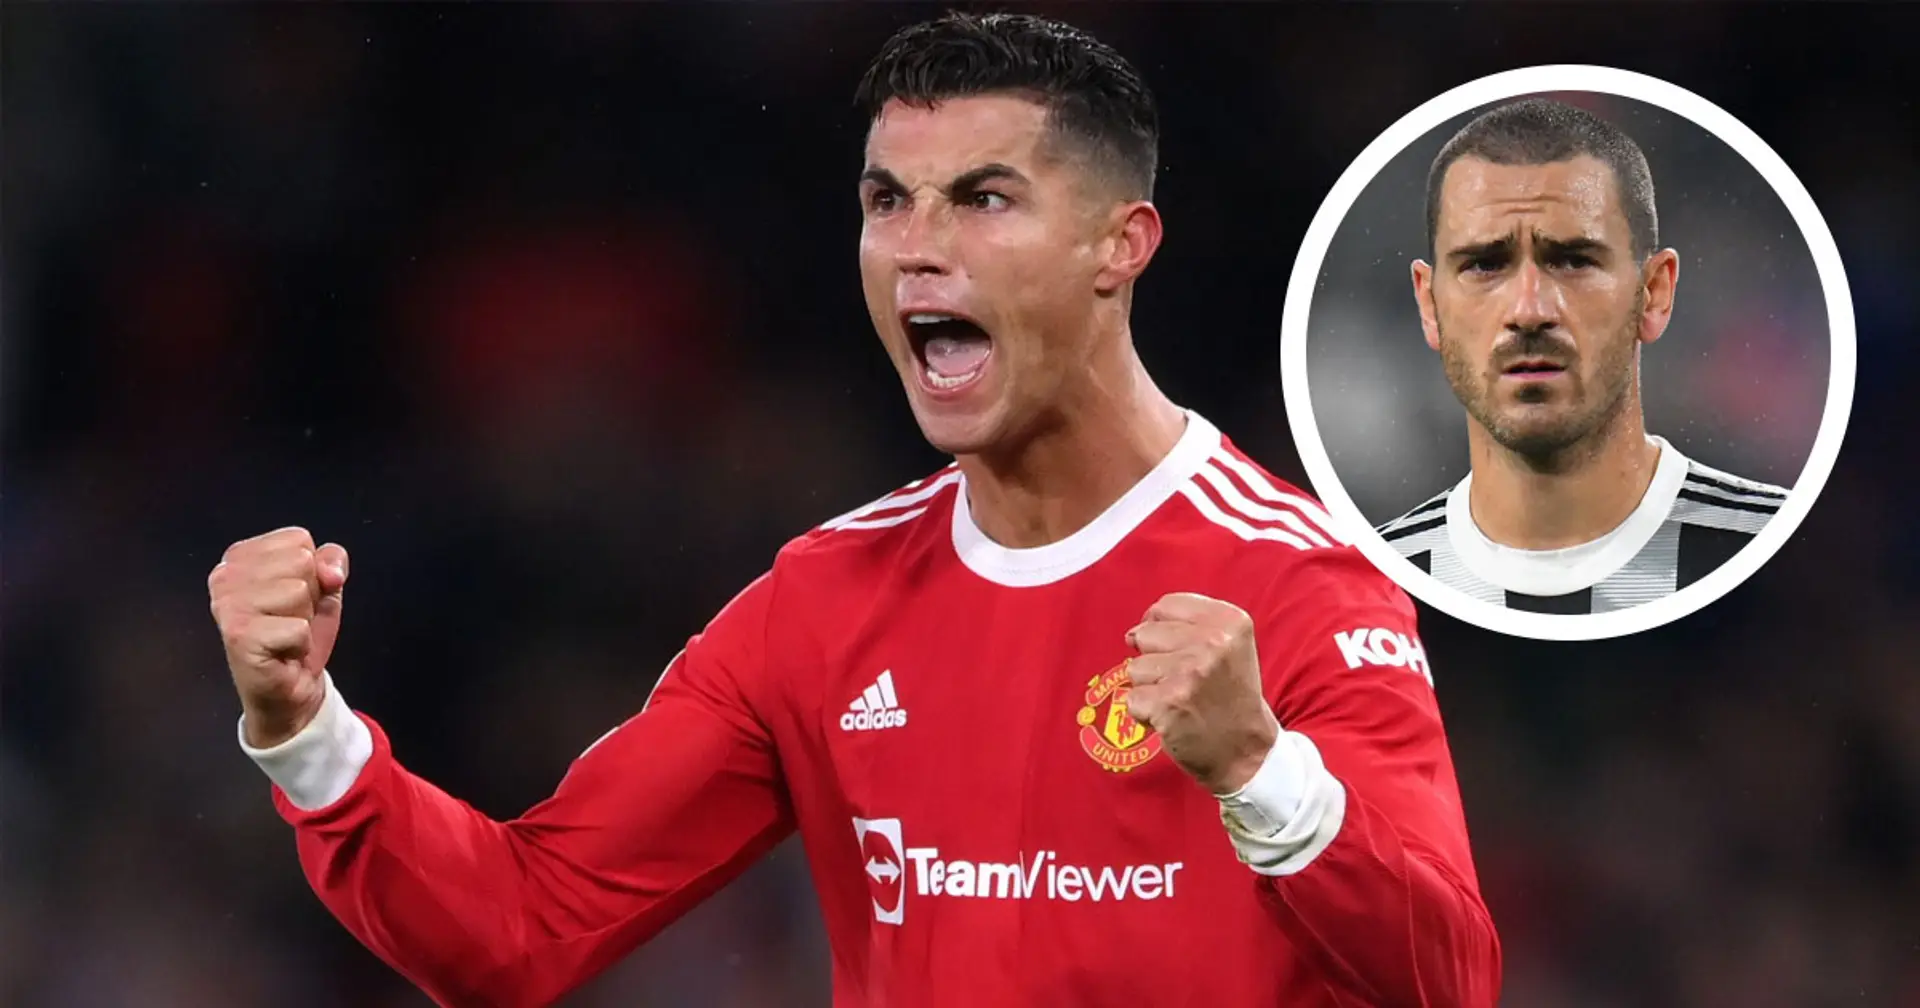 'Cristiano will suffer some blows': Italy defender Bonucci sends warning to Ronaldo before World Cup play-offs